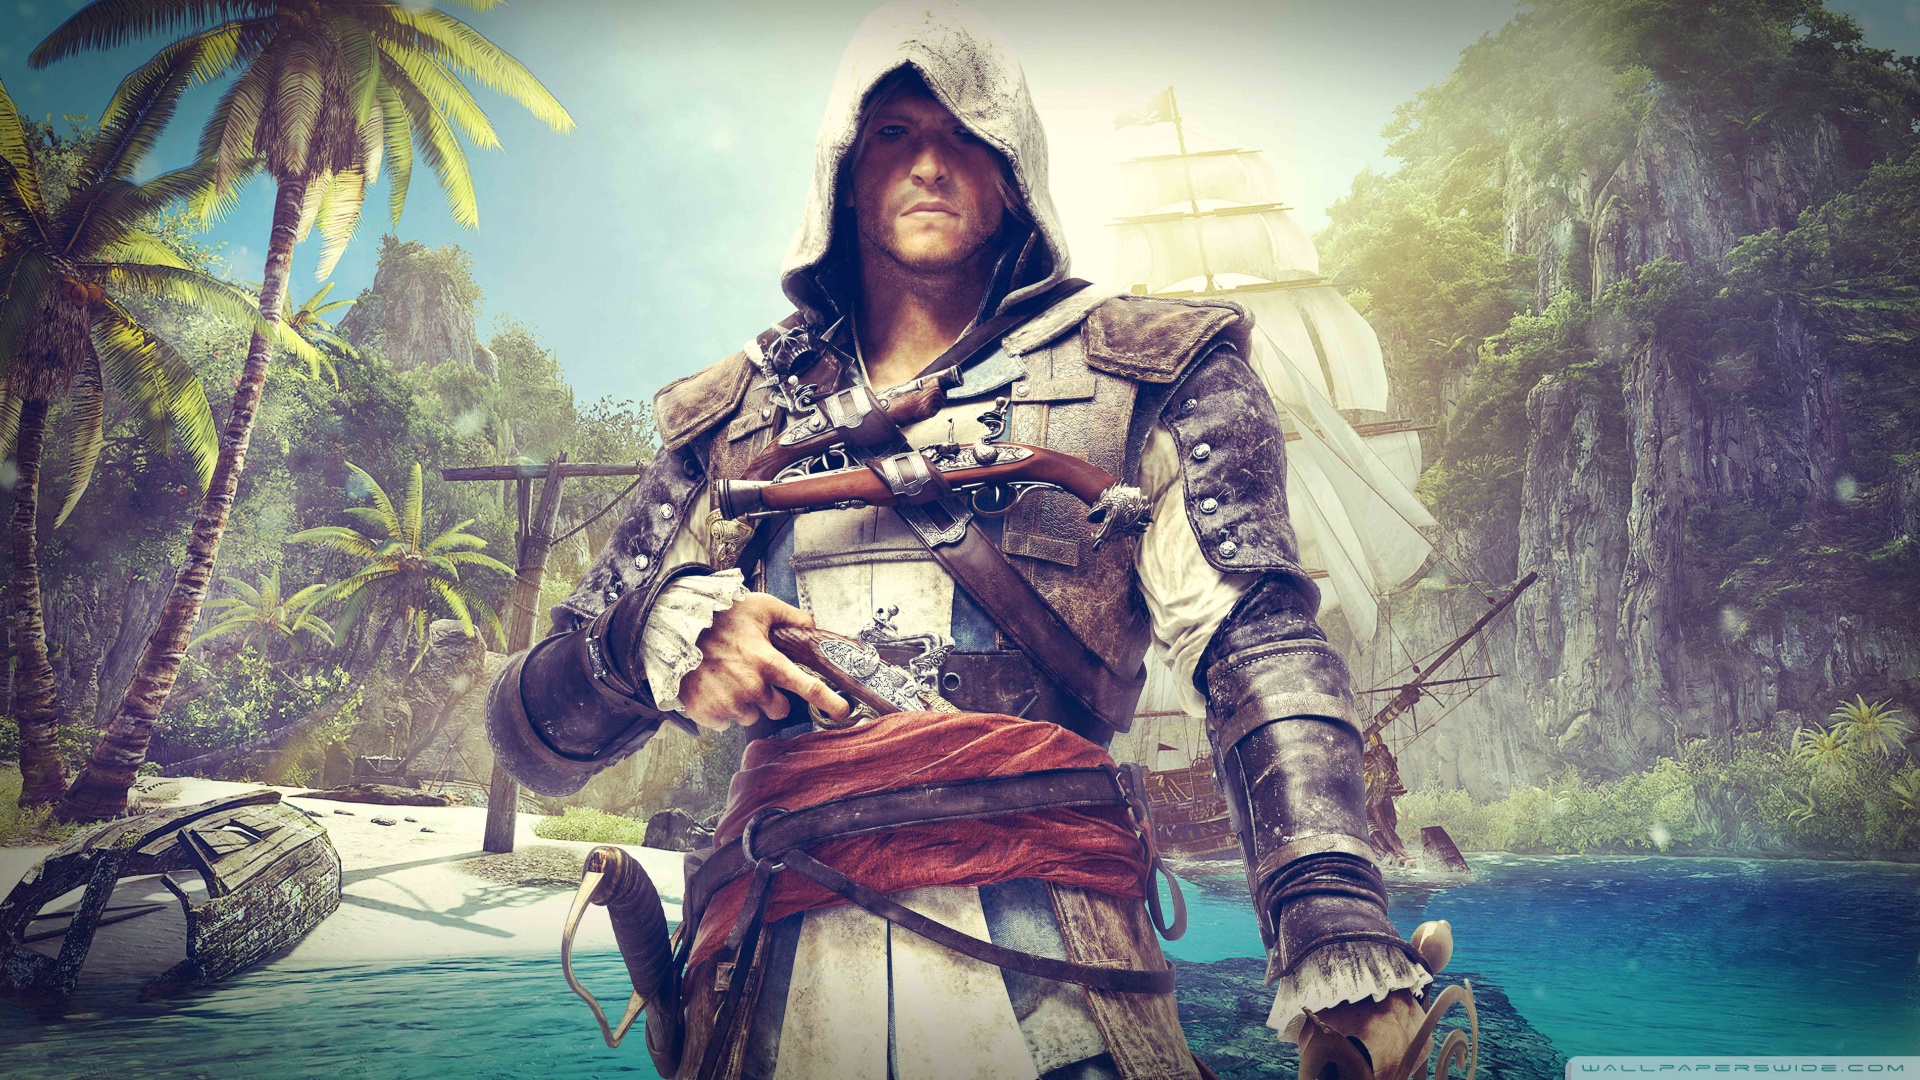 Assassins Creed 4 Black Flag Wallpapers in 1080P HD